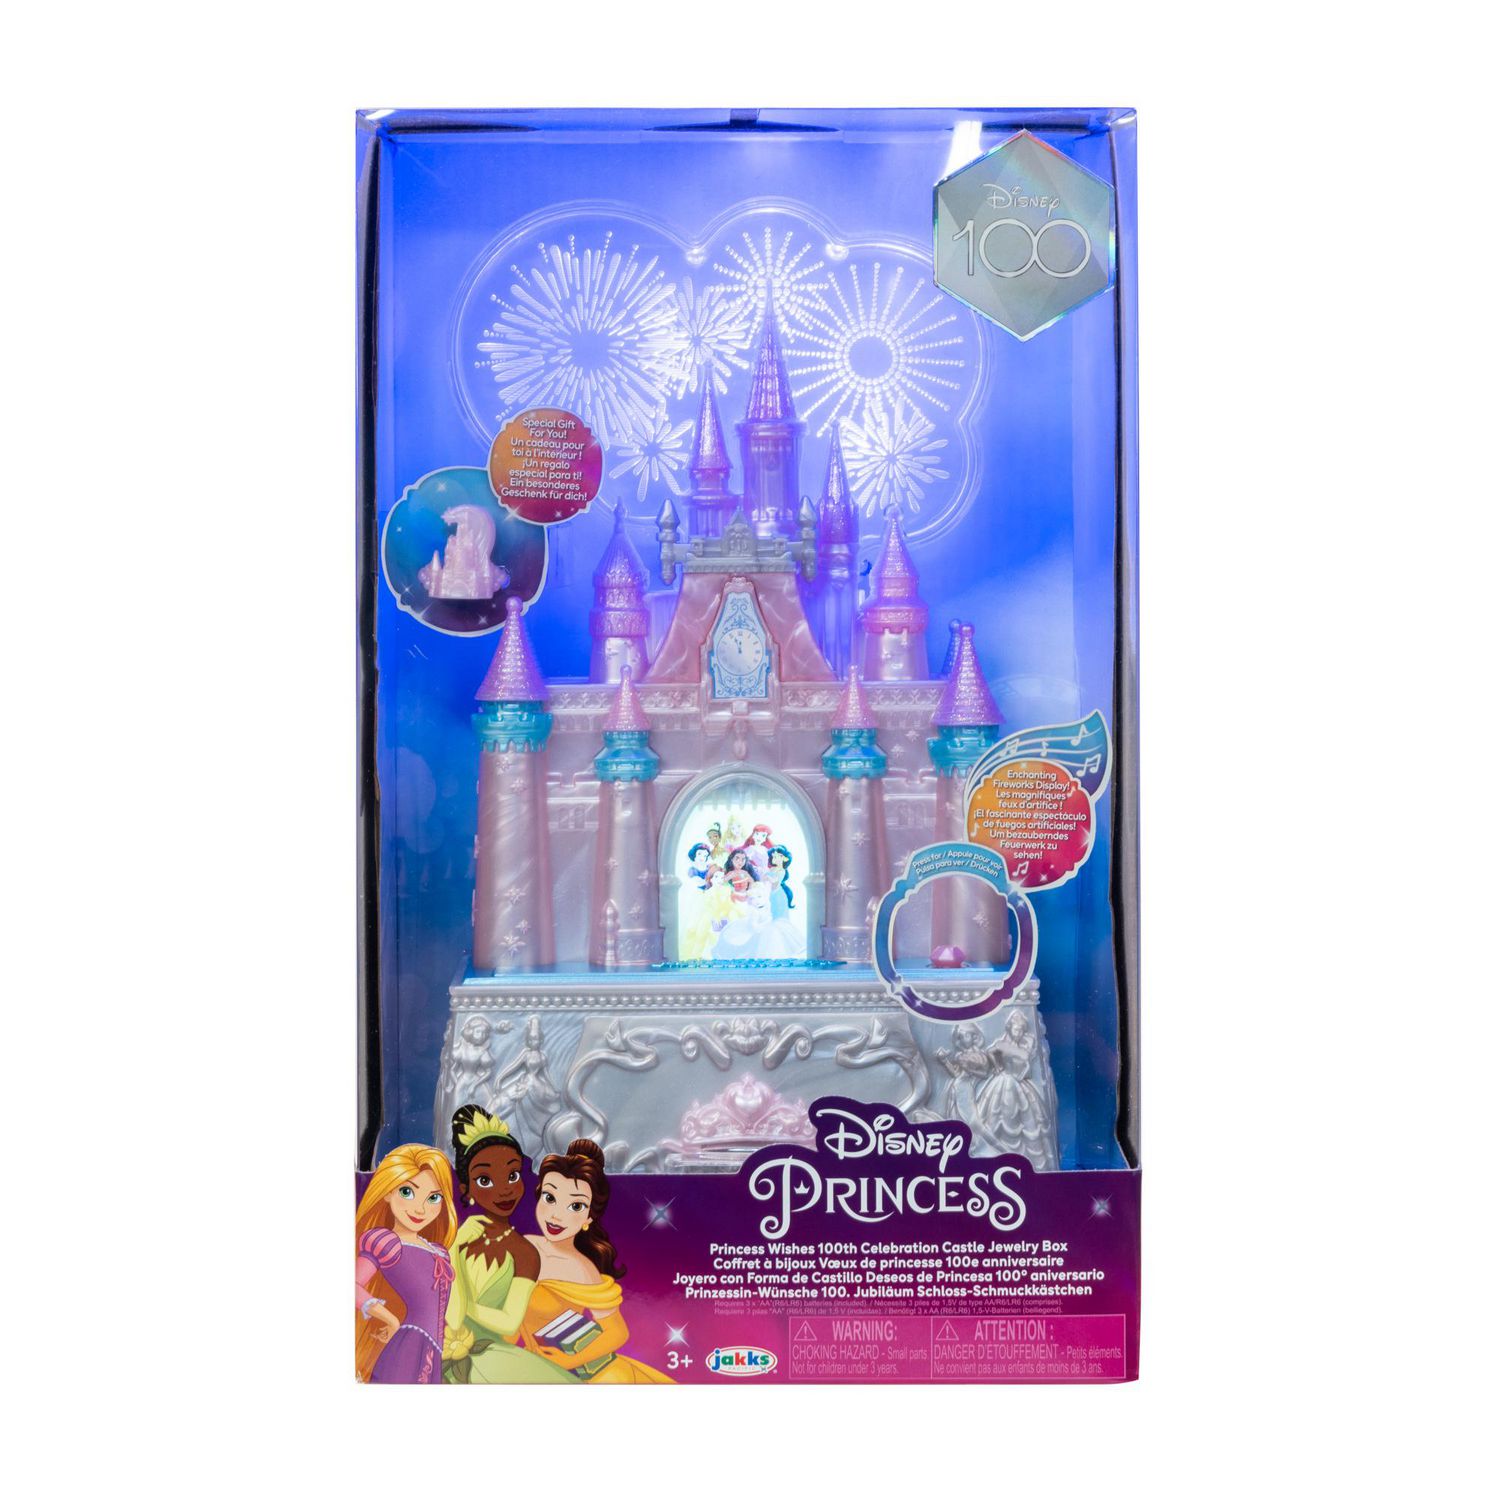 Princess Wishes 100th Celebration Castle Jewelry Box, Comes with a